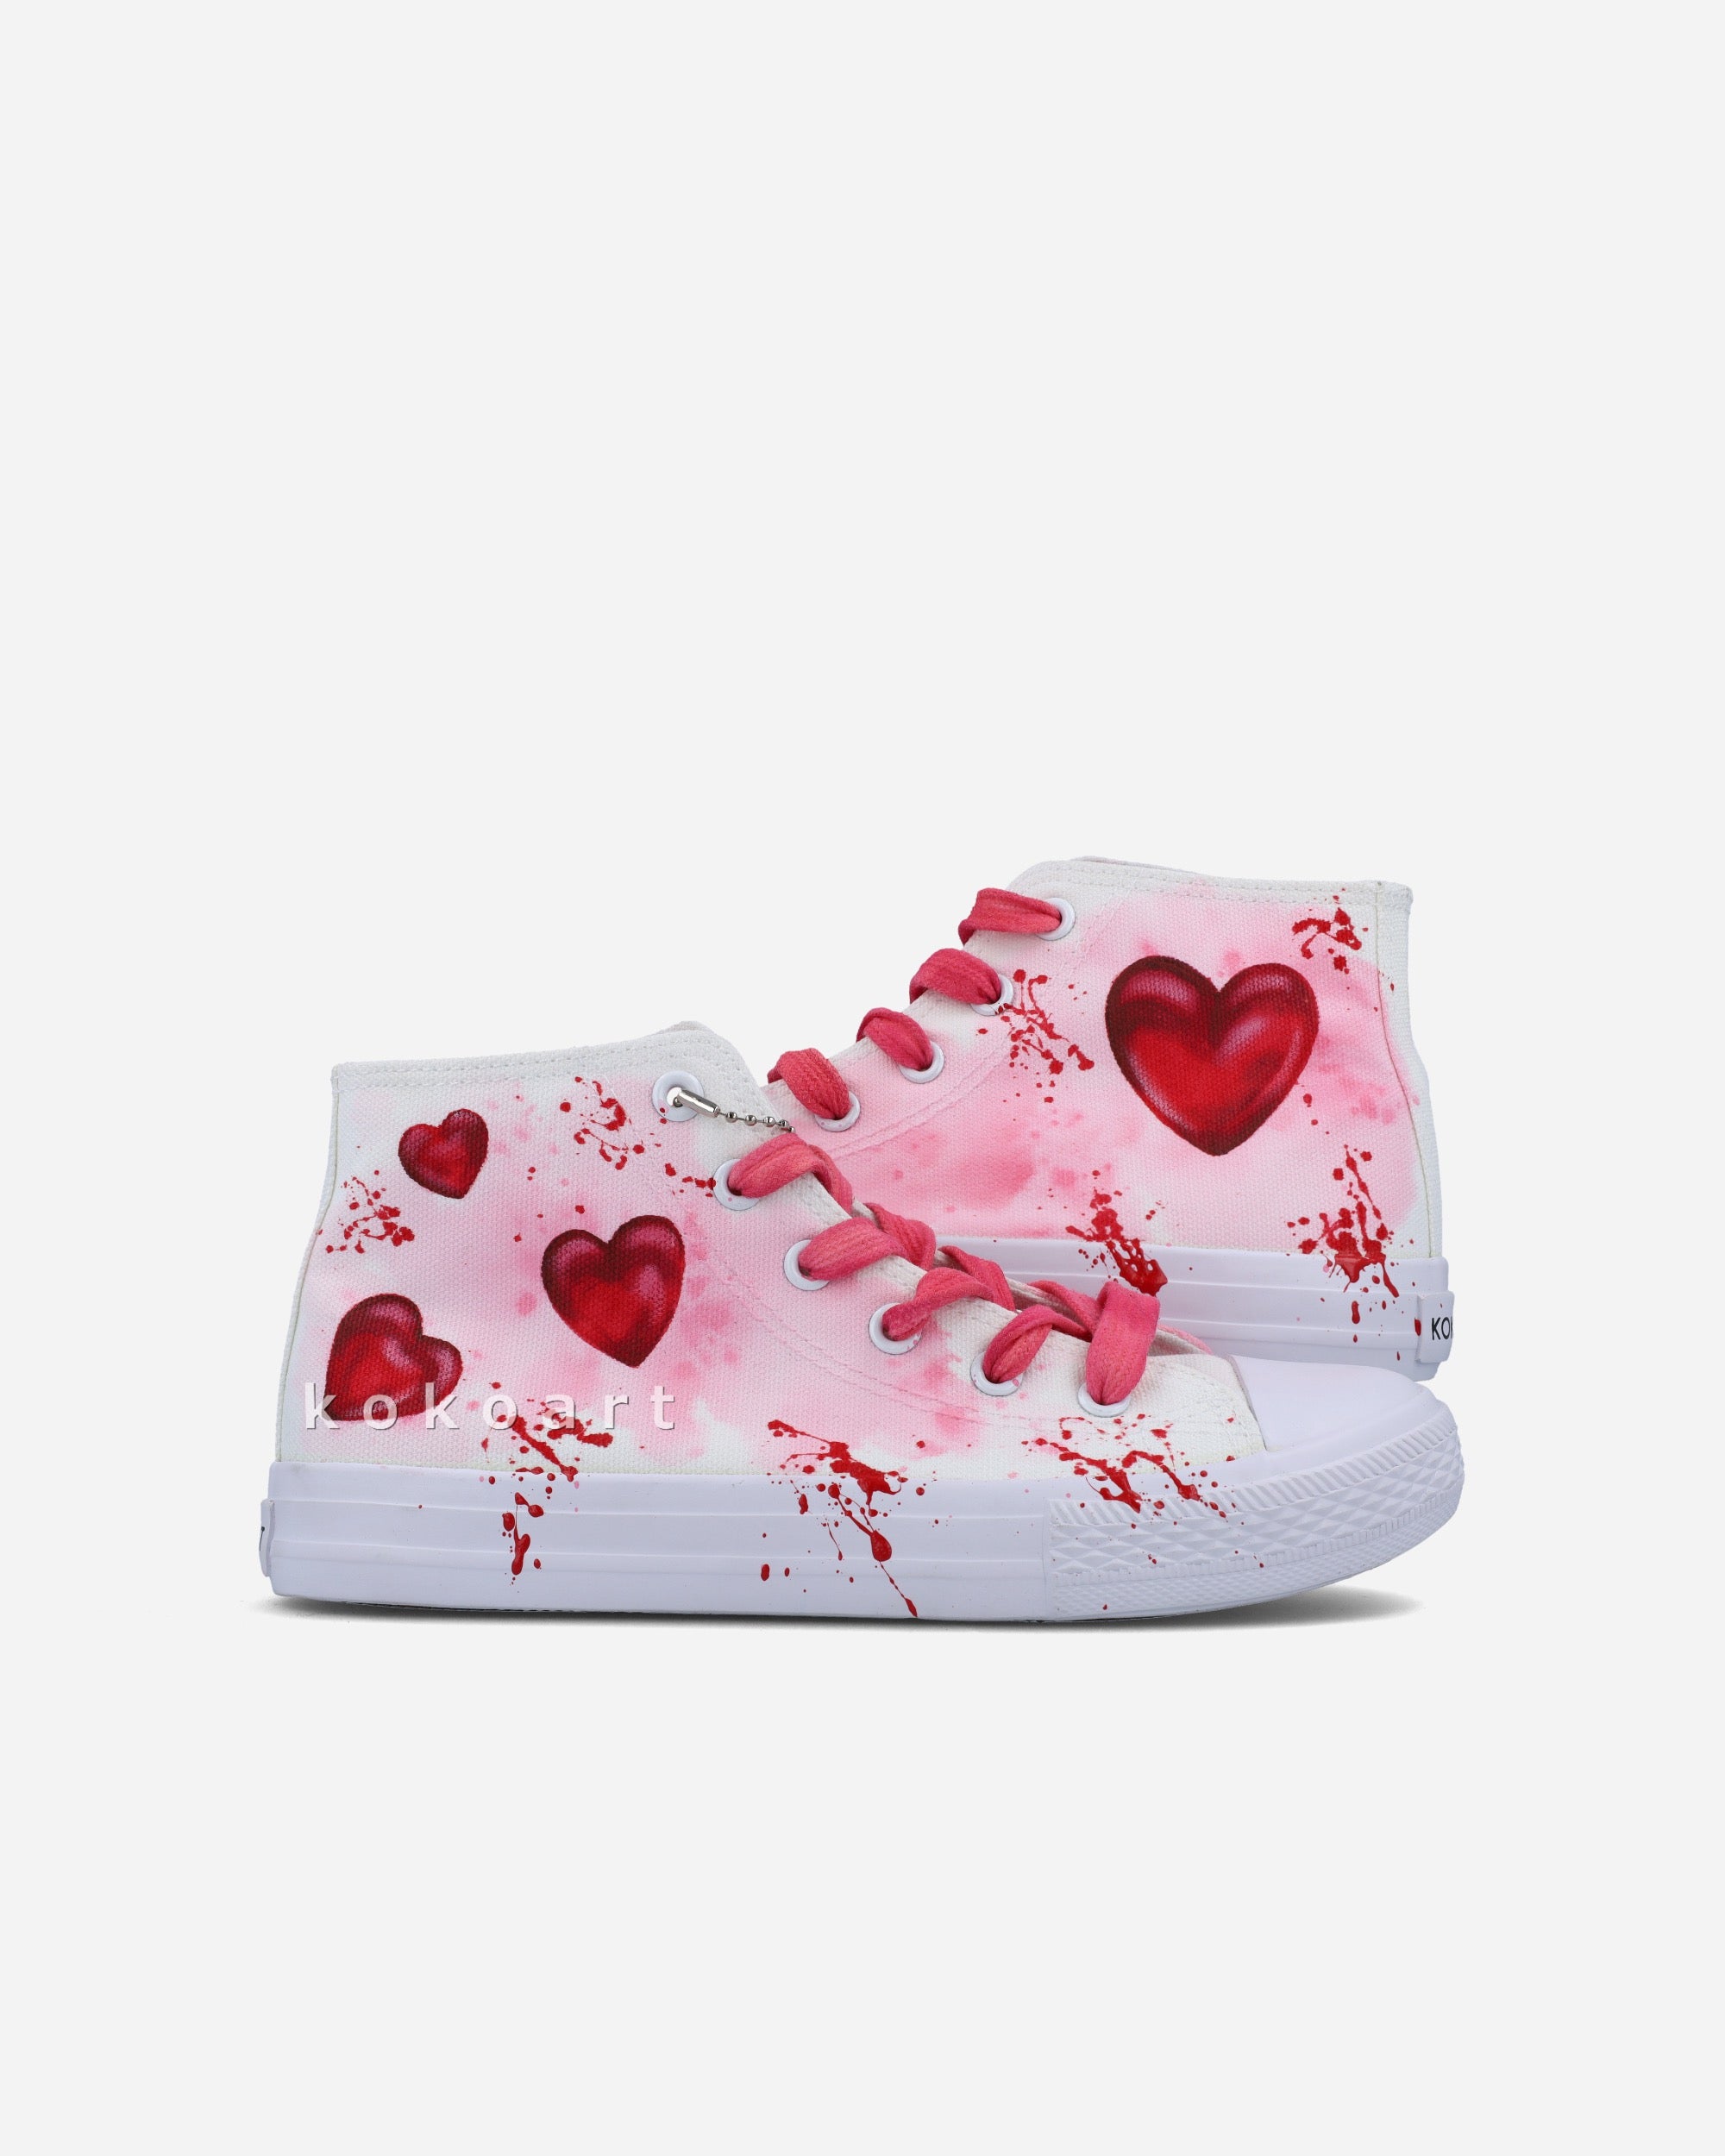 Shiny Hearts Hand Painted Shoes